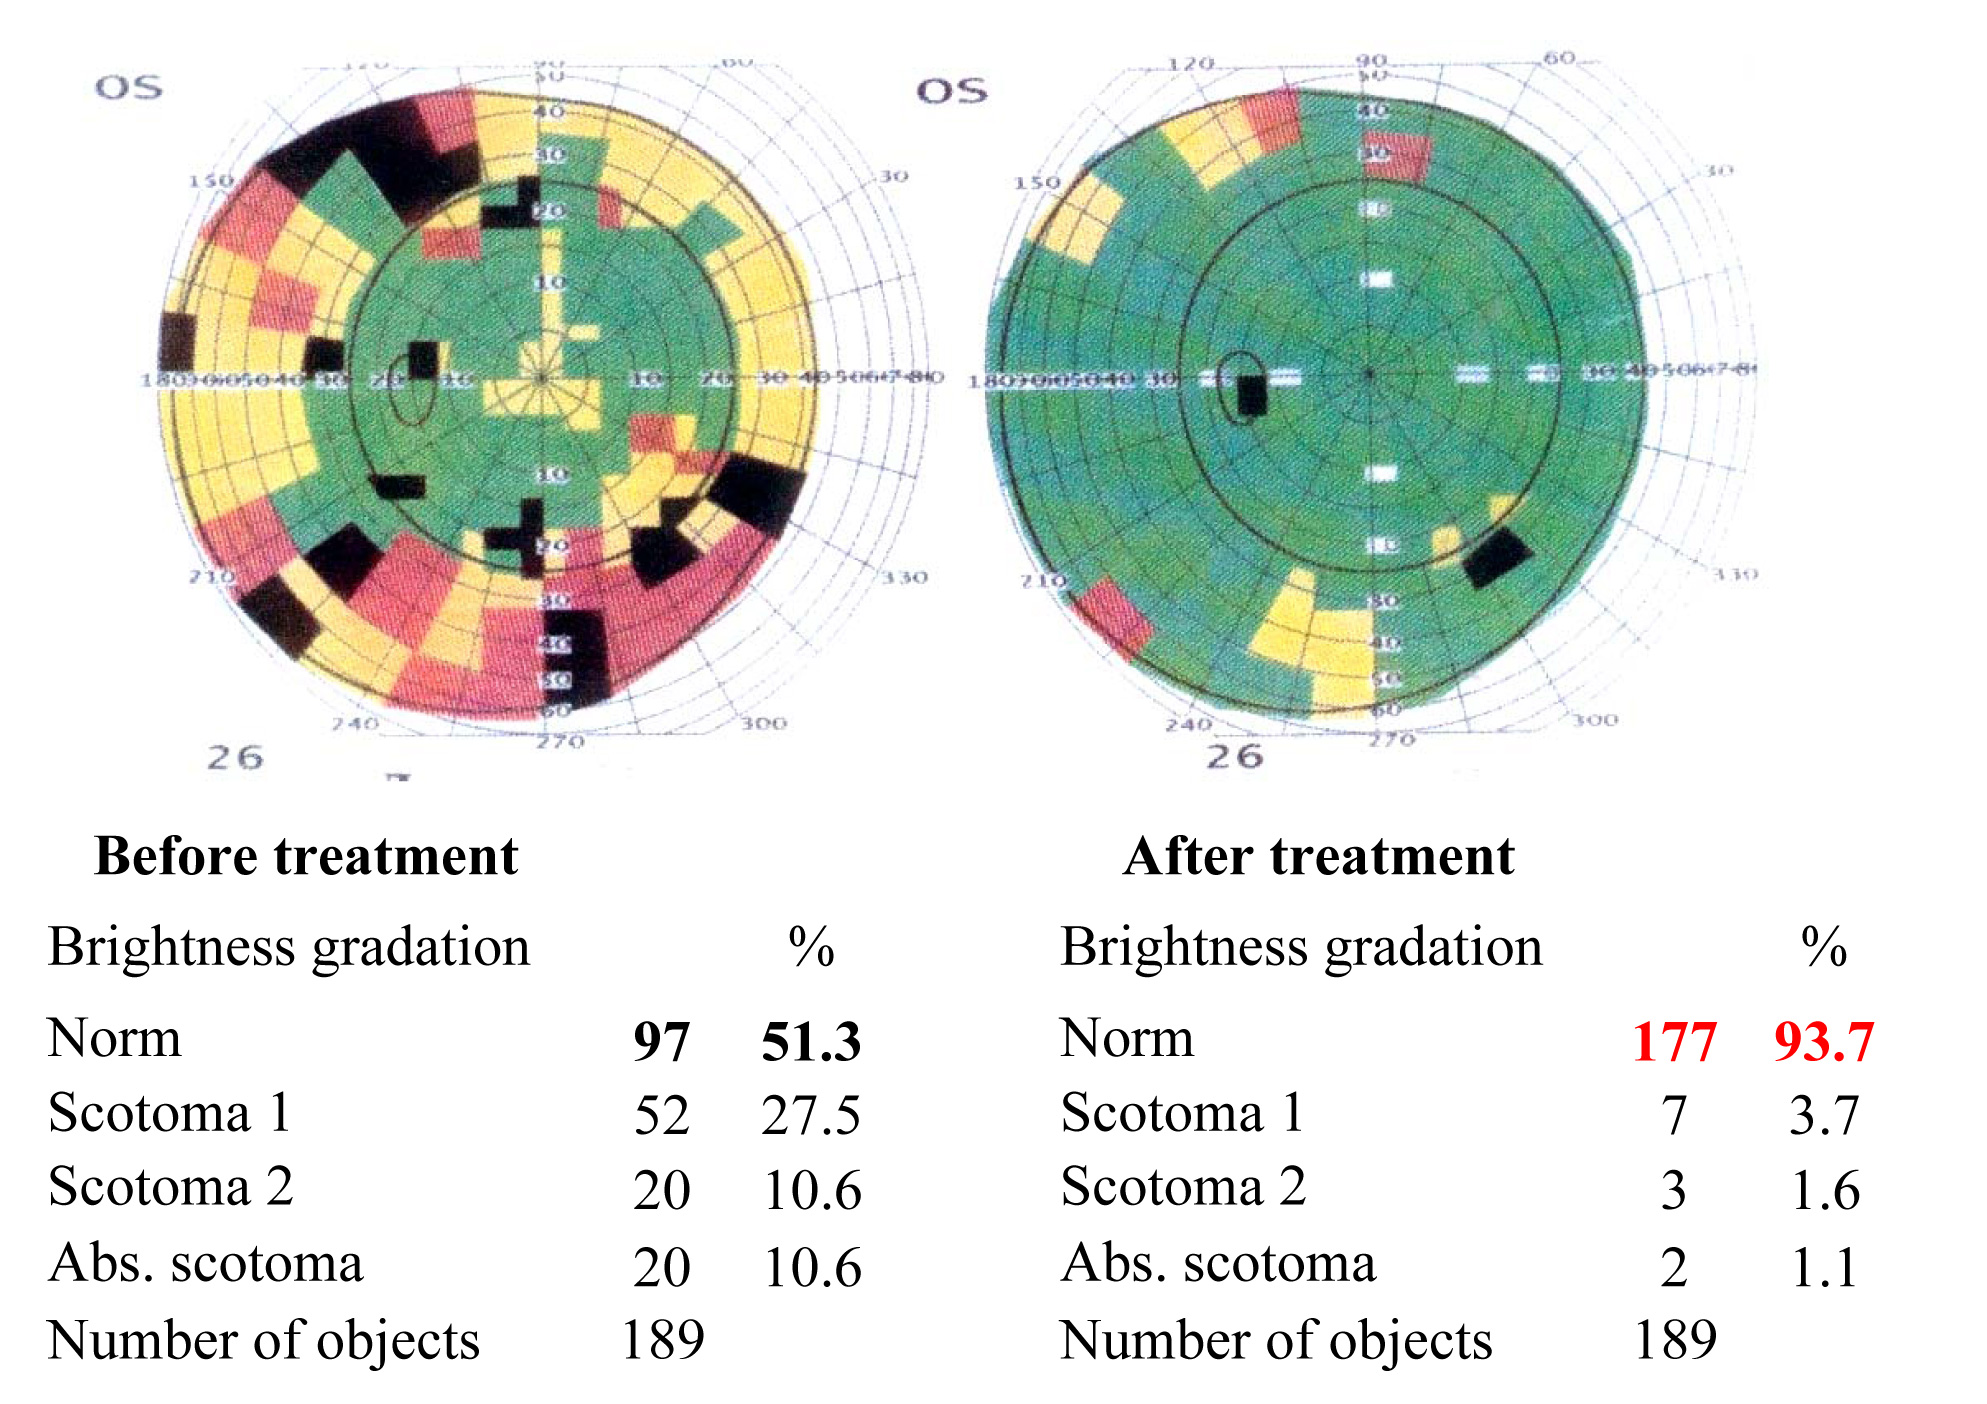 Results of the visual functions tests before and after the treatment course